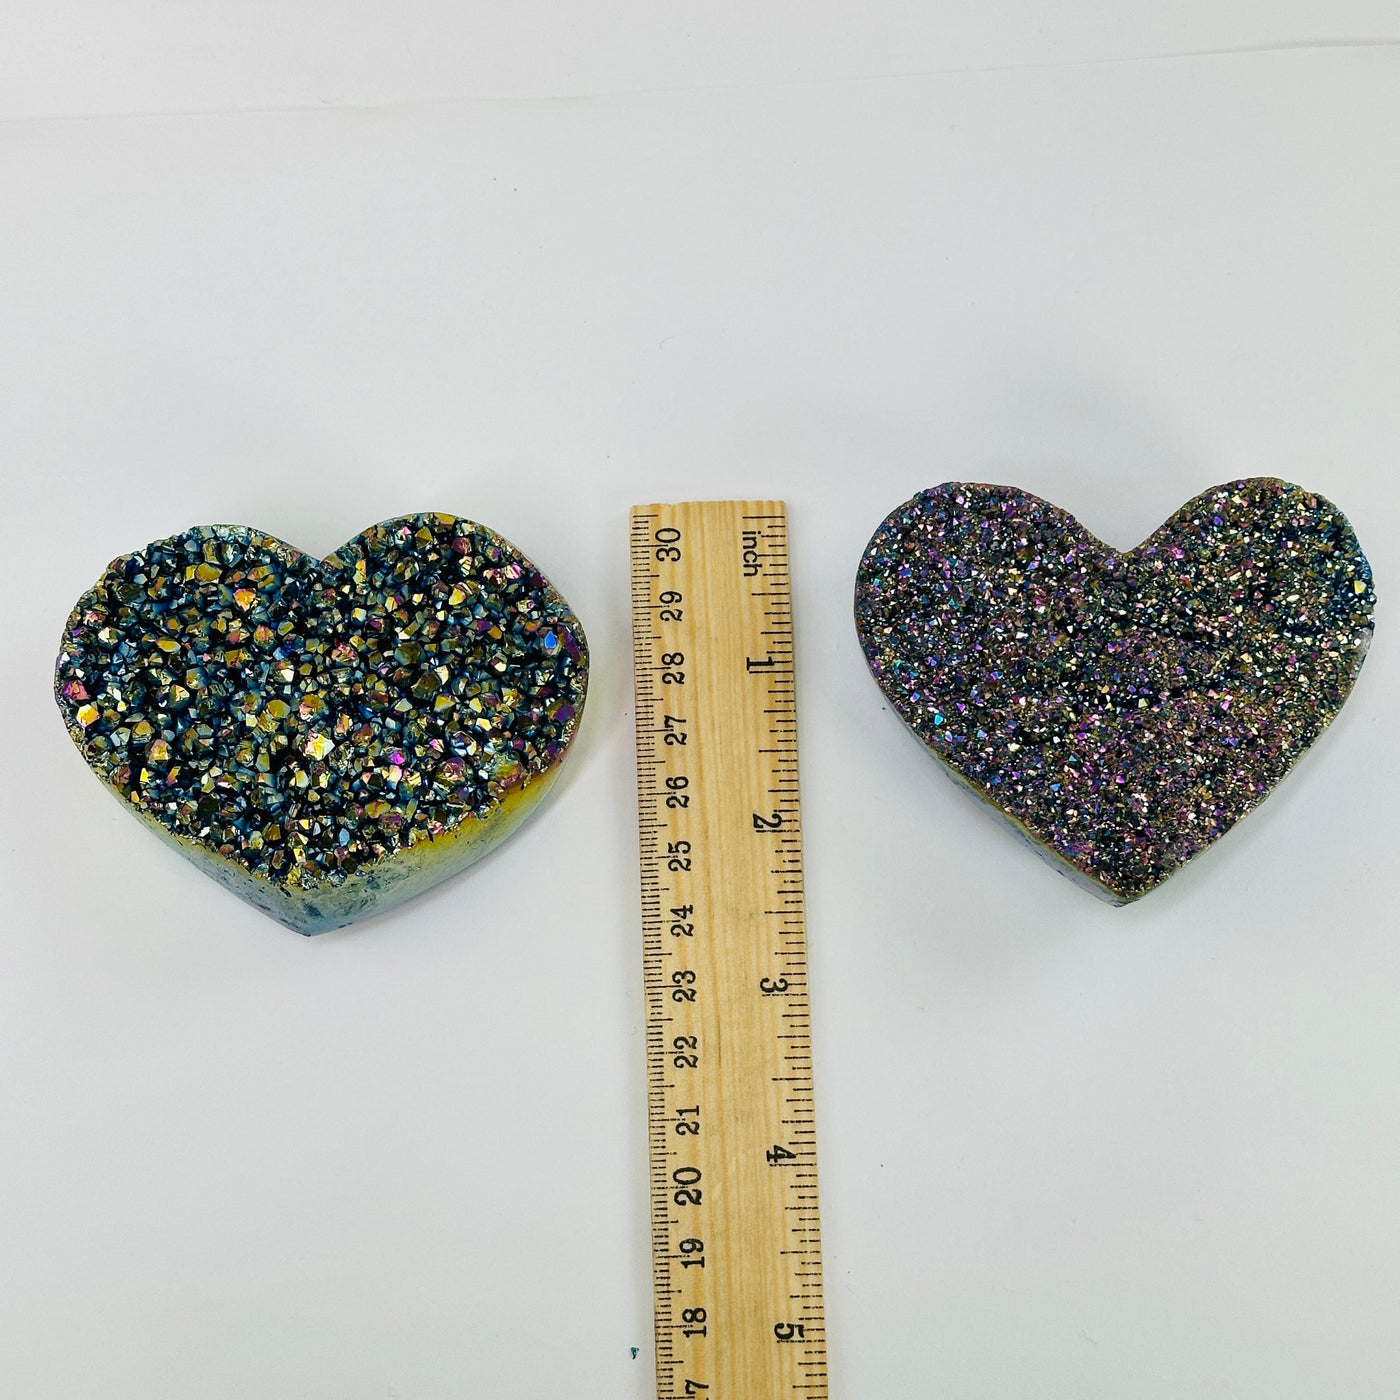 Rainbow titanium heart next to a ruler for size reference 